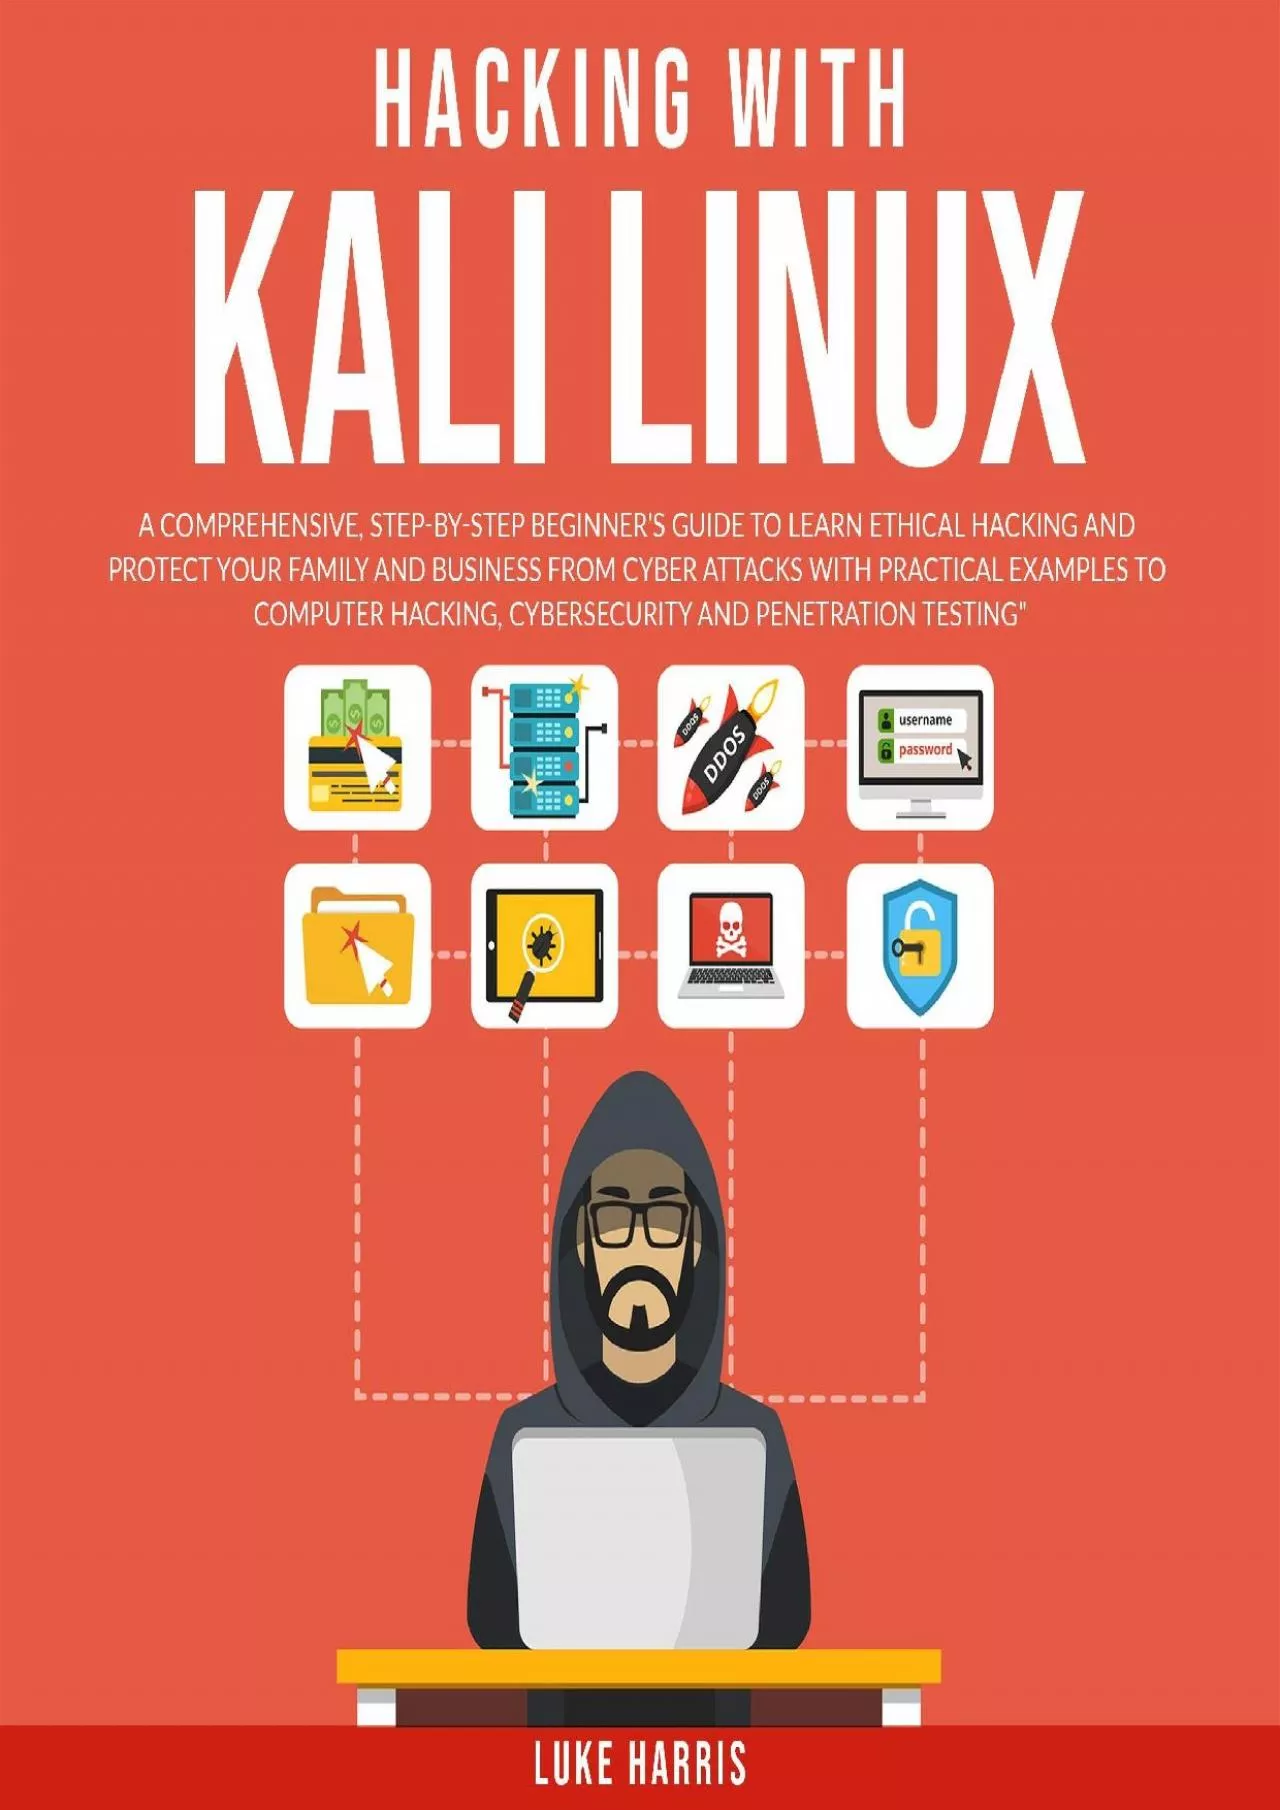 (EBOOK)-Hacking with Kali Linux: A Comprehensive, Step-by-Step Beginner\'s Guide to Learn